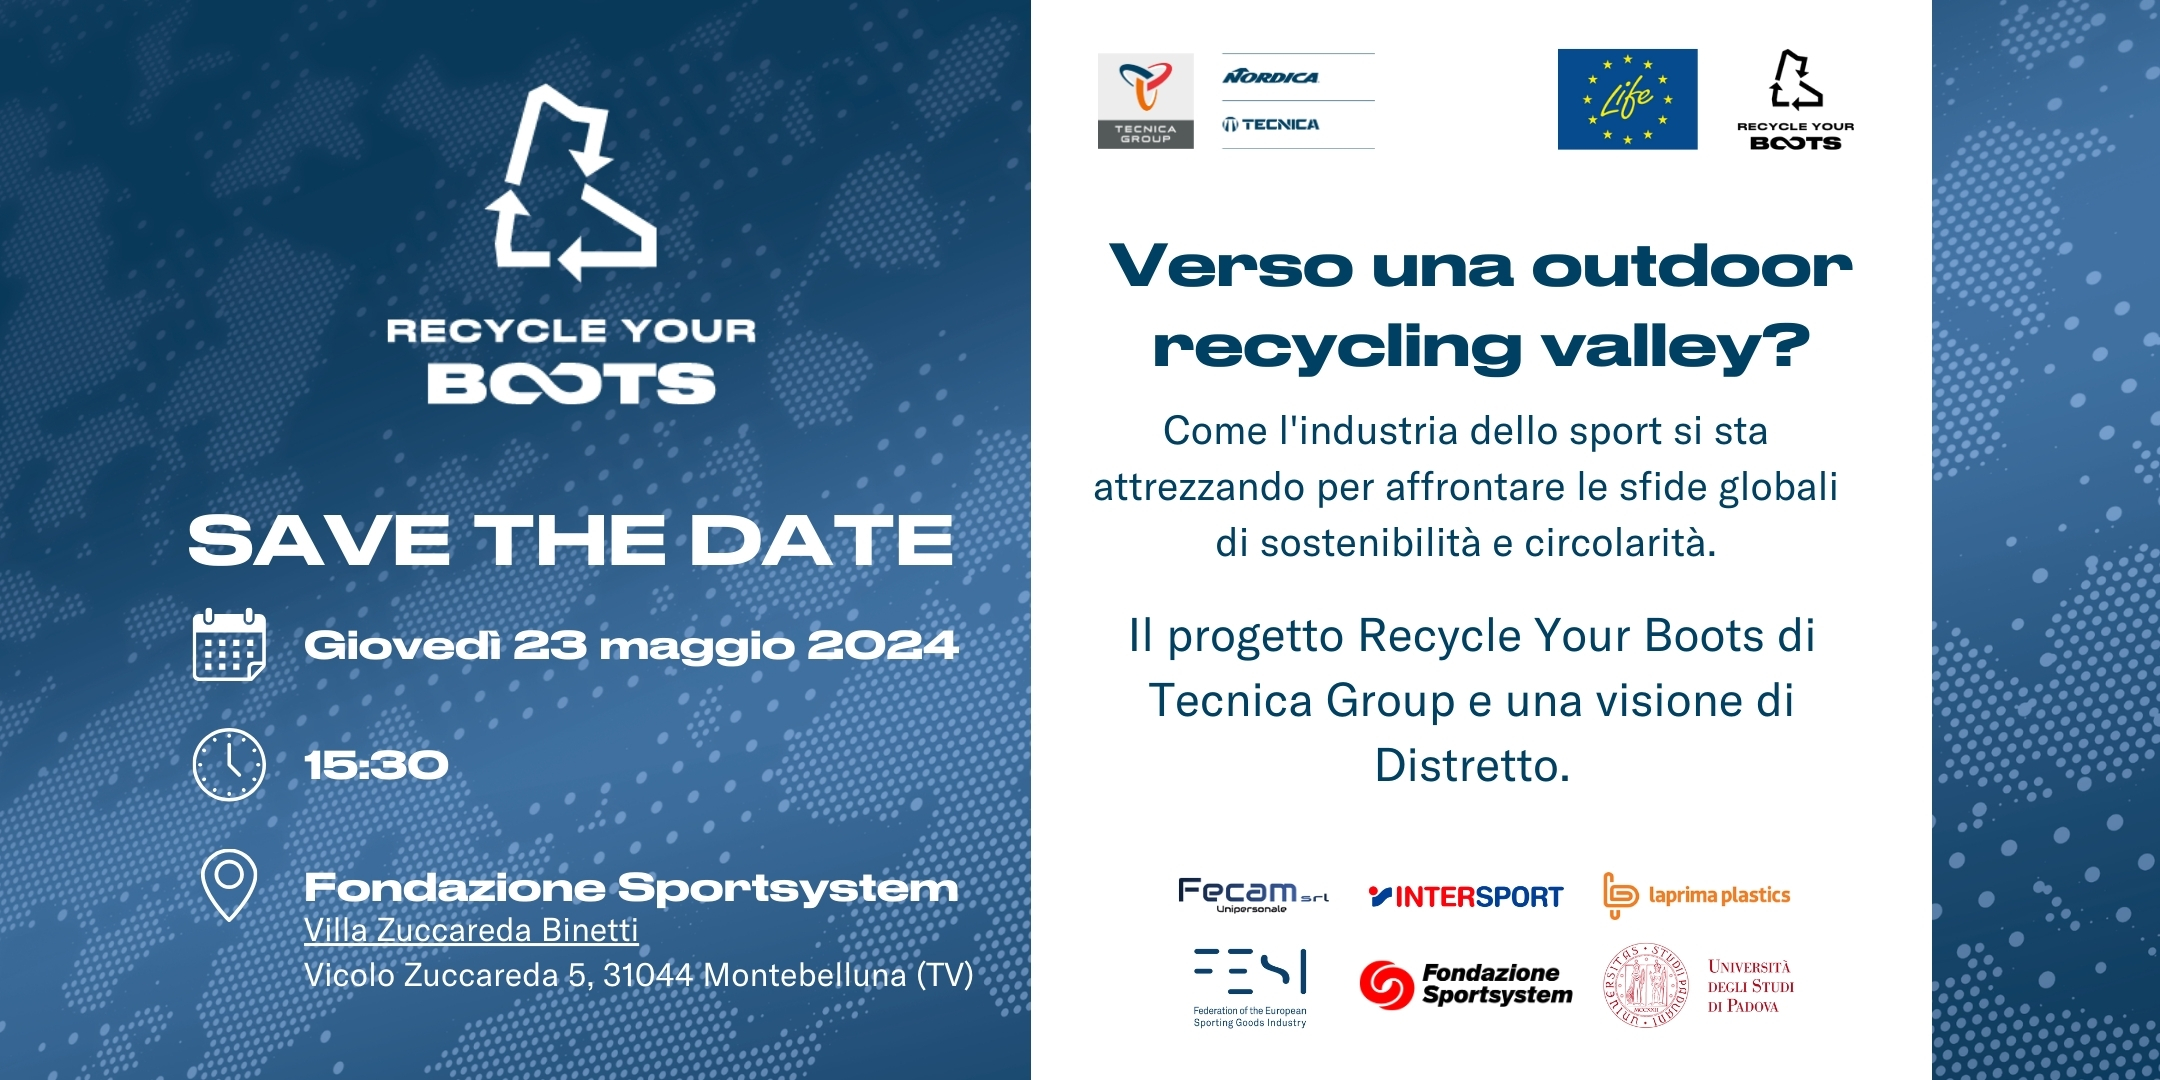 “Towards an outdoor recycling valley”? Thursday 23/5 at 15.30